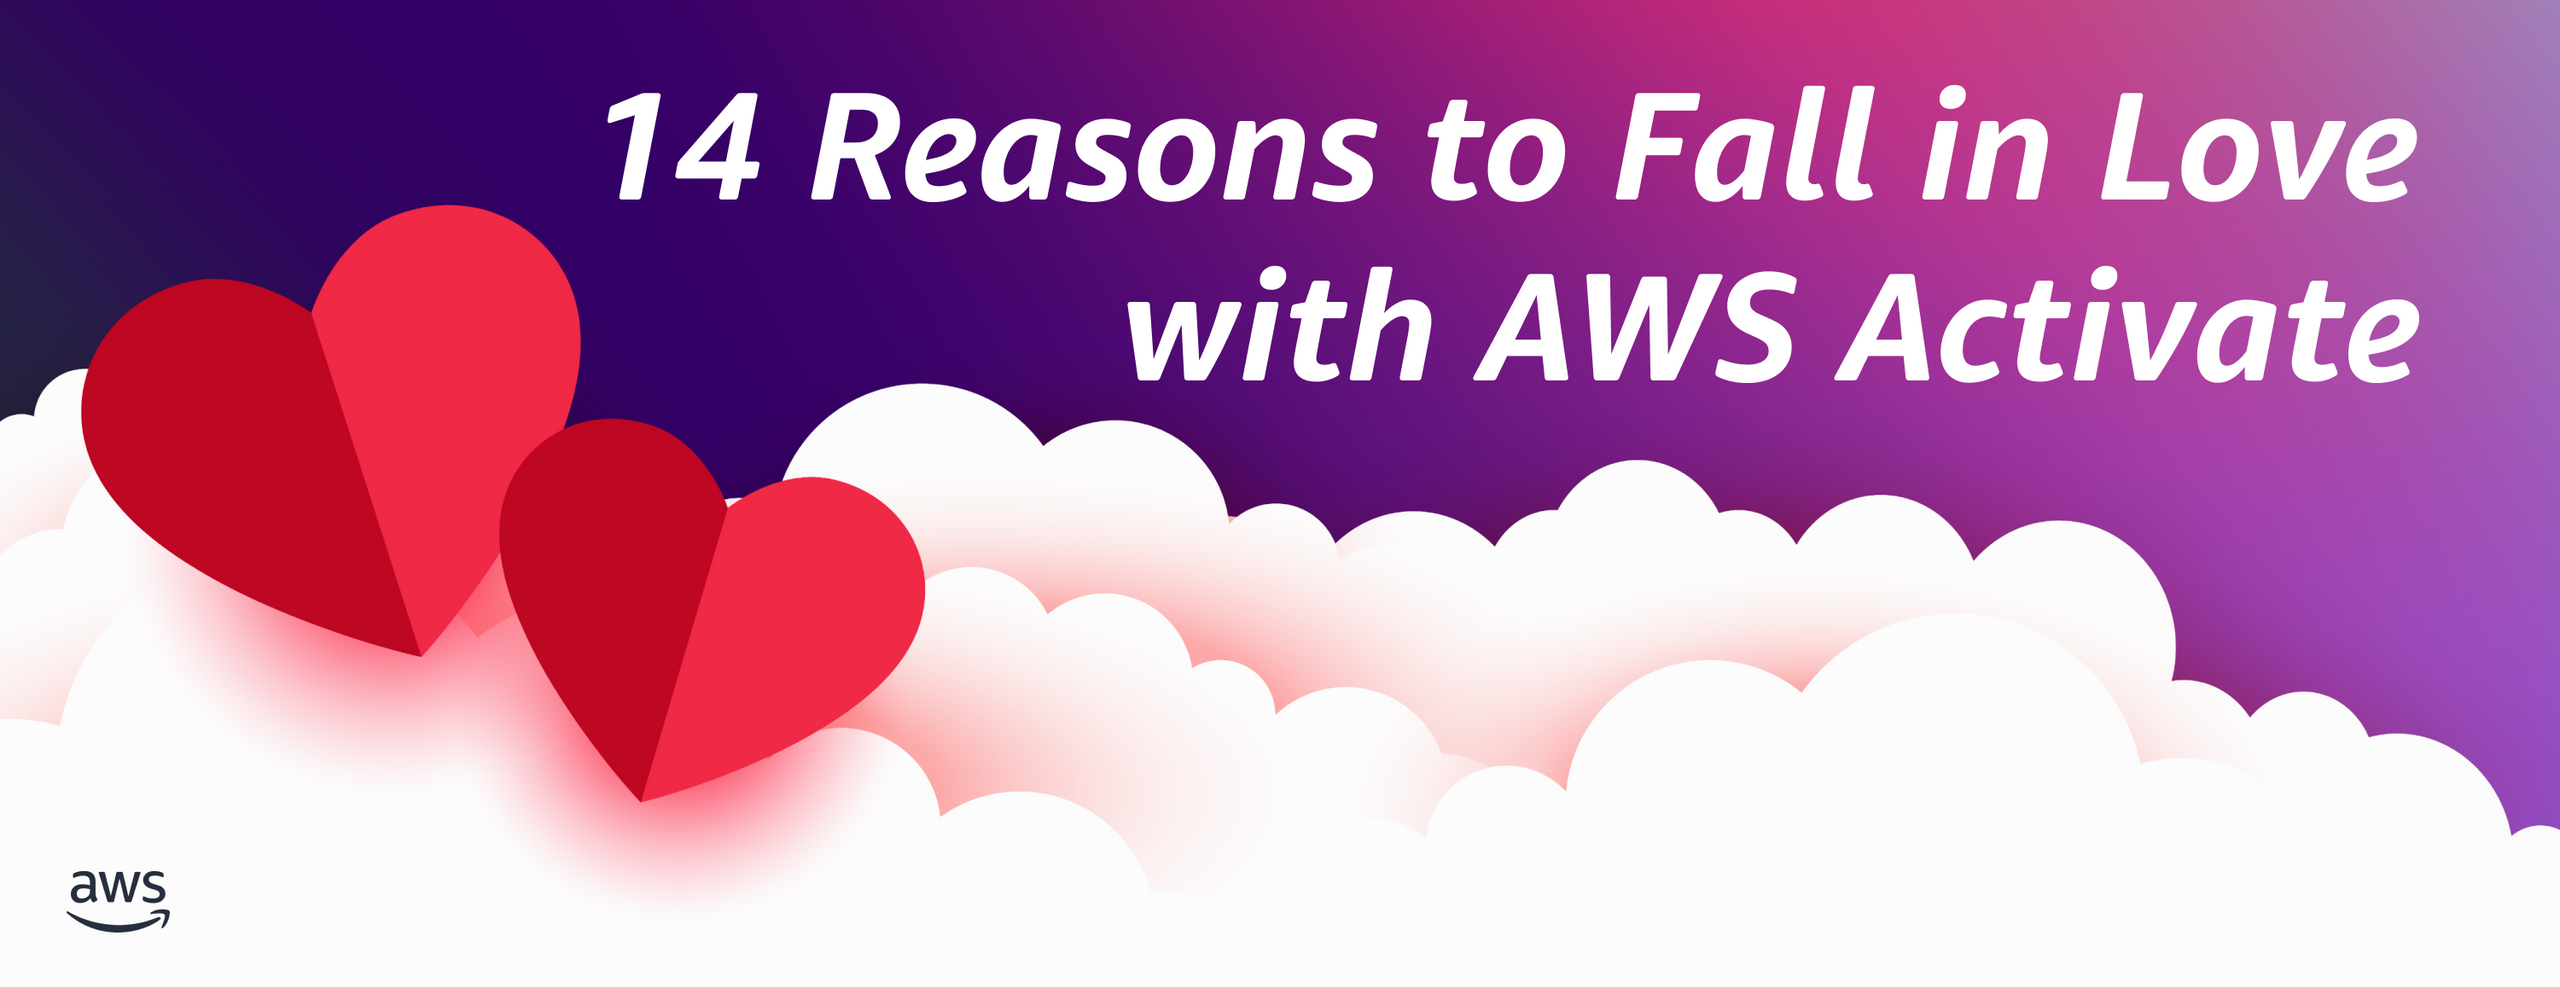 14 reasons to fall in love with AWS Activate